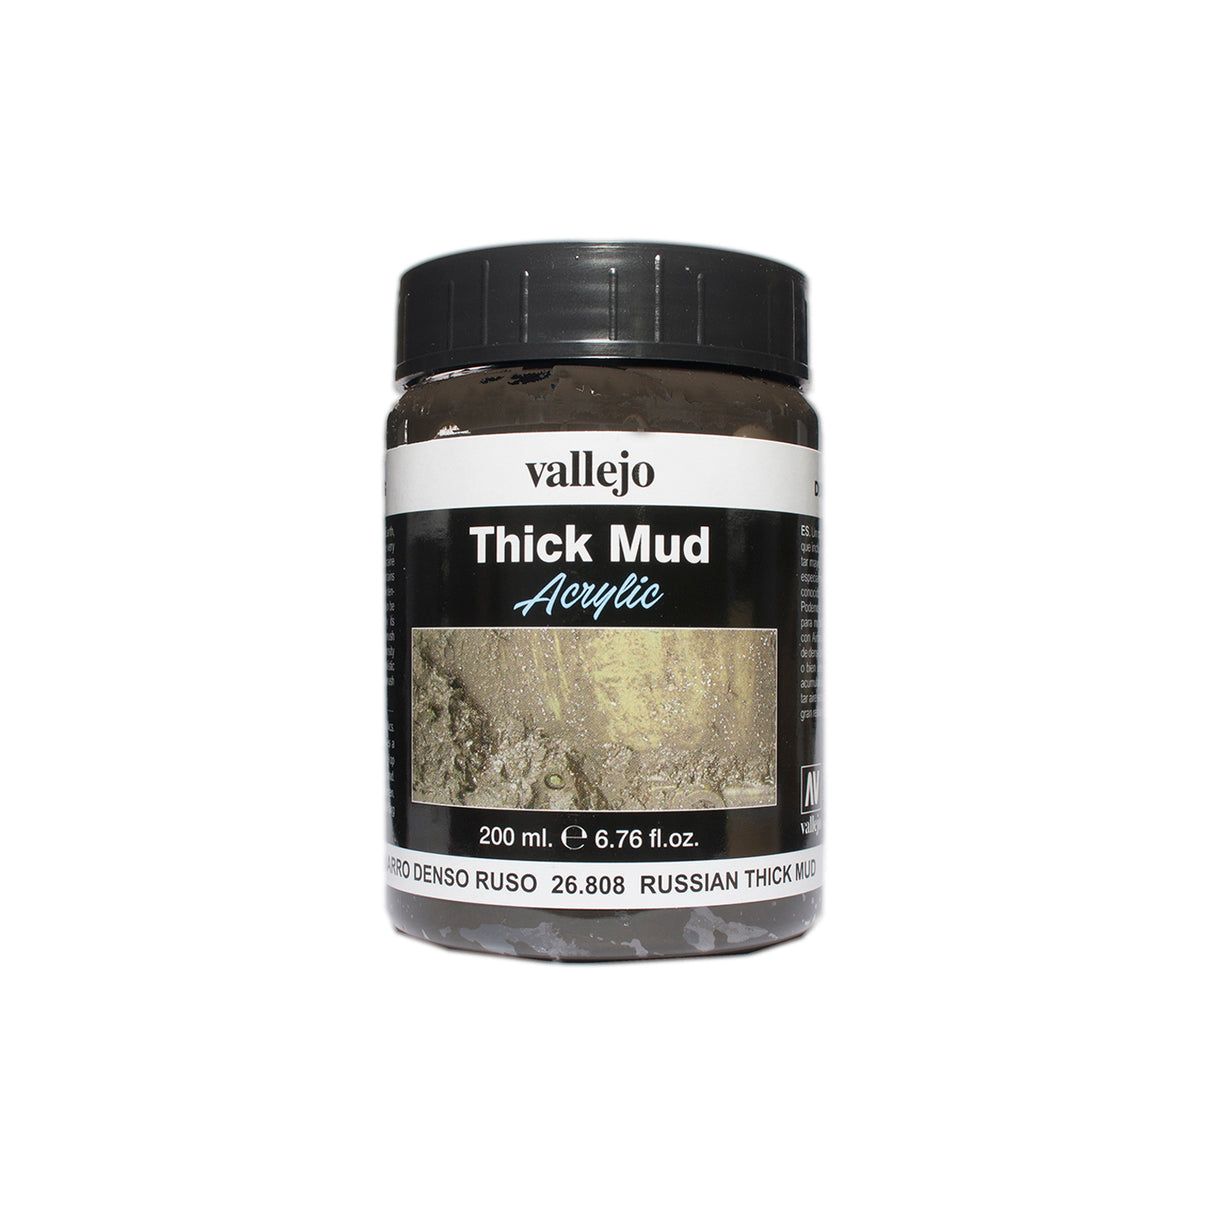 Vallejo Diorama EffecTS Russian Thick Mud 200ml Vallejo PAINT, BRUSHES & SUPPLIES